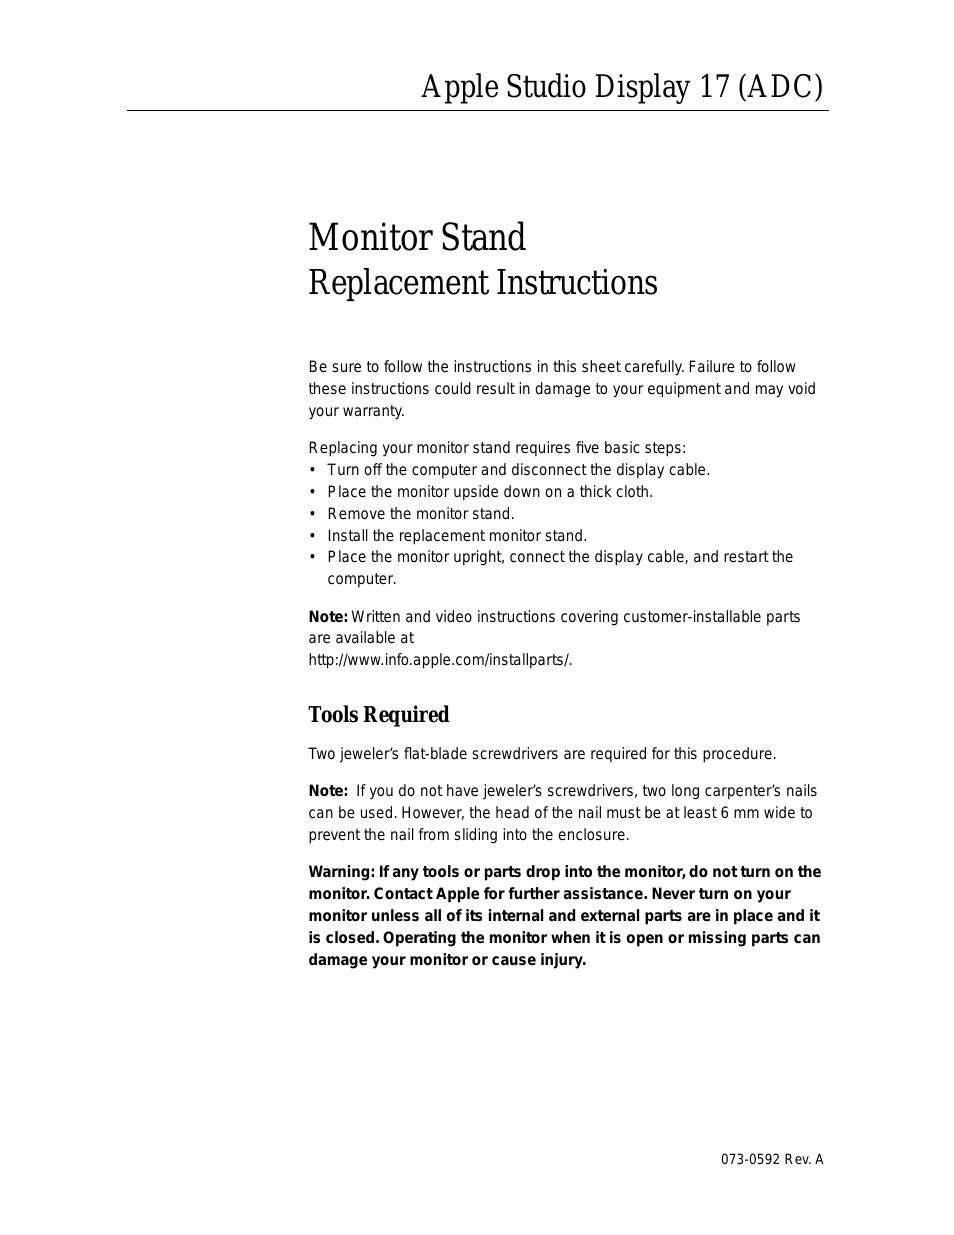 Studio Display 17 (ADC) Monitor Stand Replacement